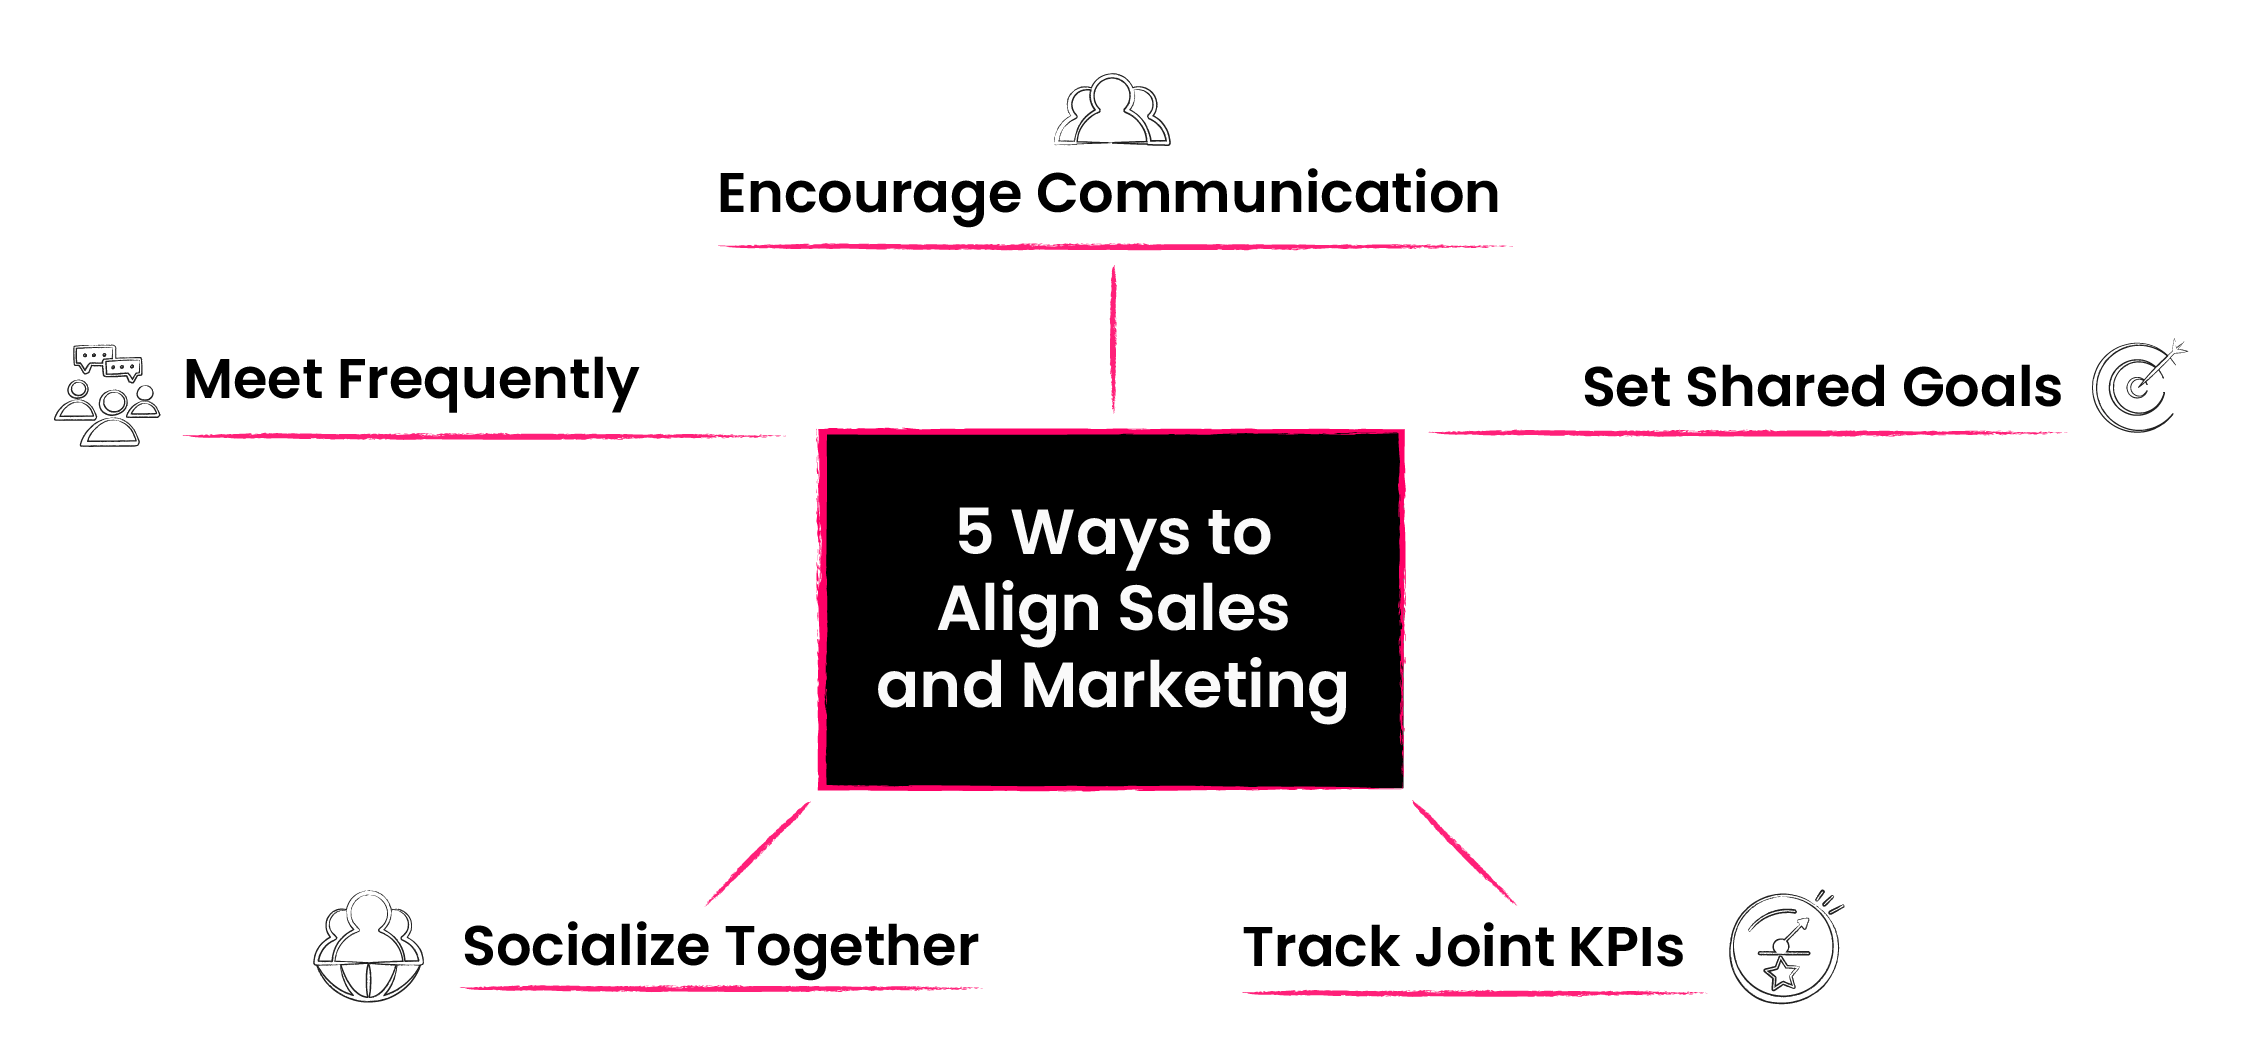 5 Ways to Align Sales and Marketing